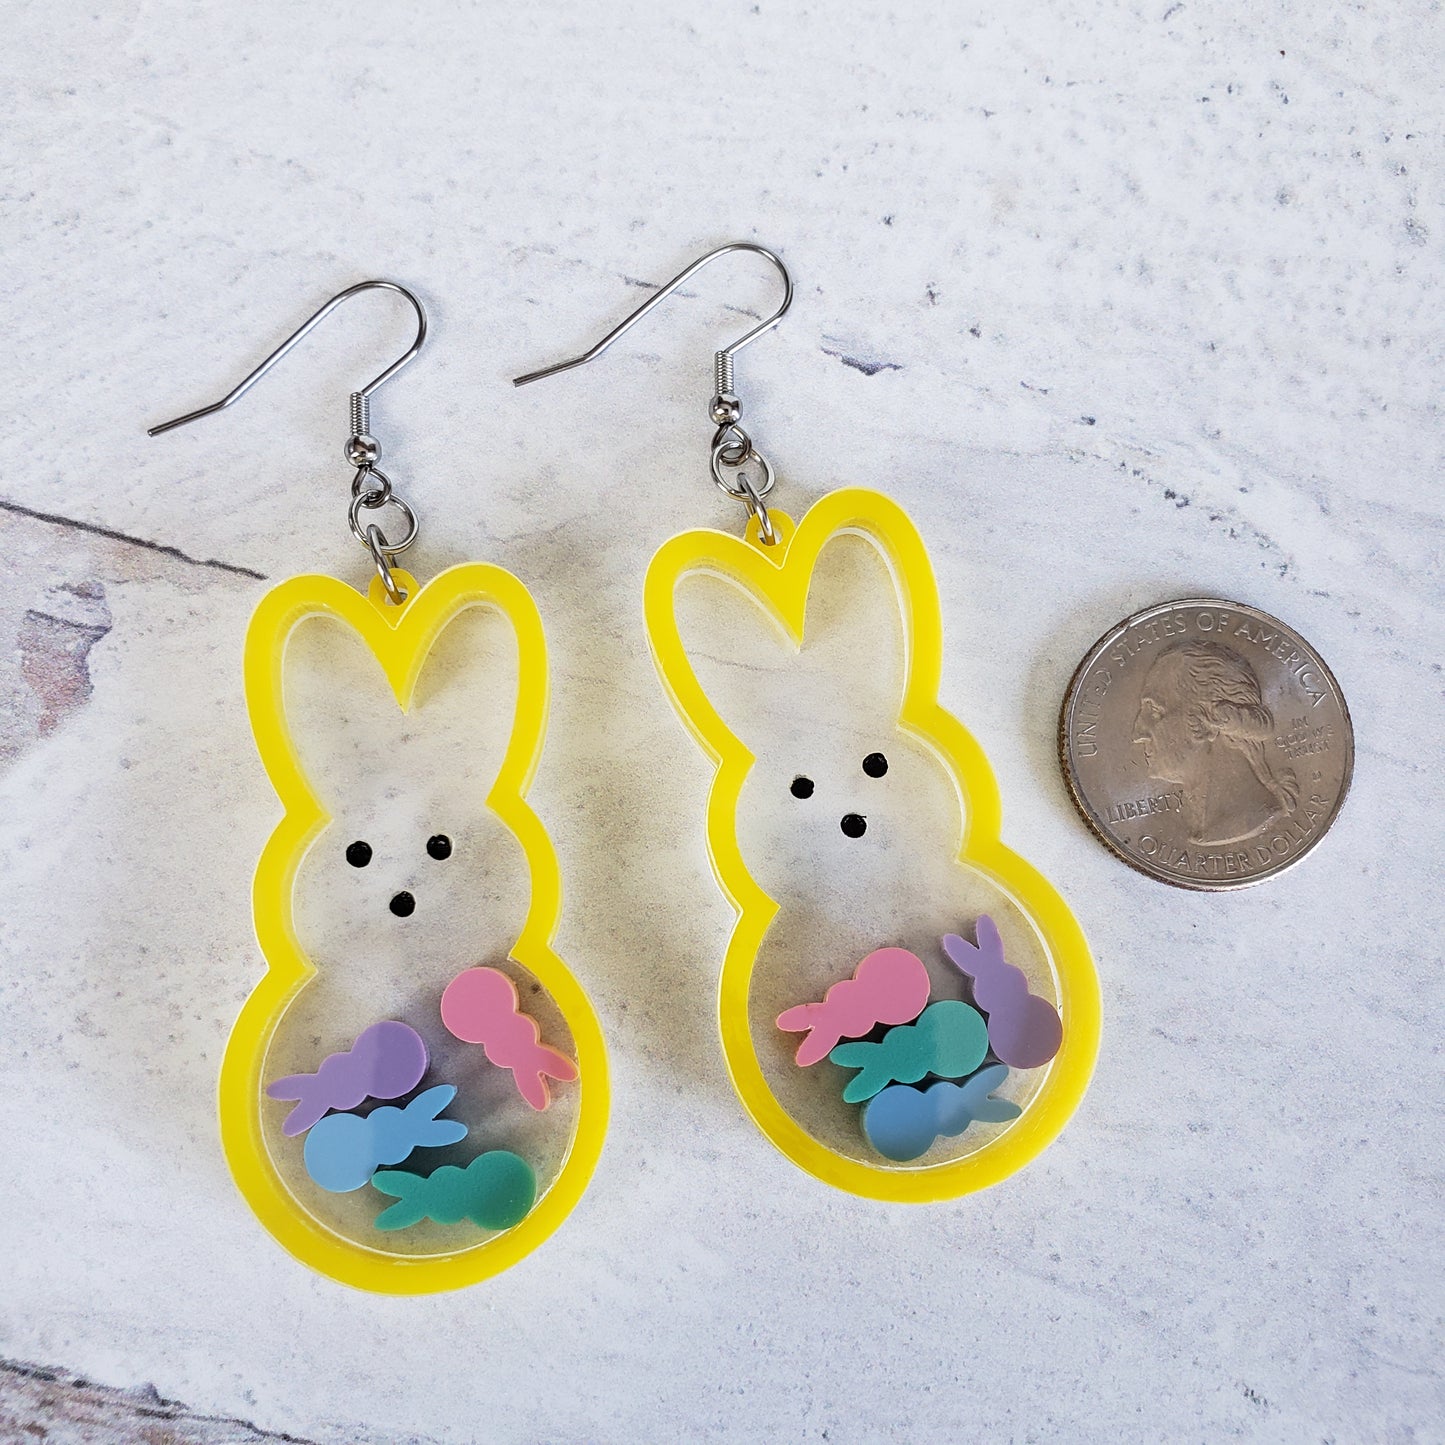 Marshmallow bunny shaker earrings in yellow with pastel bunnies inside on stainless steel earring wires next to quarter for size.